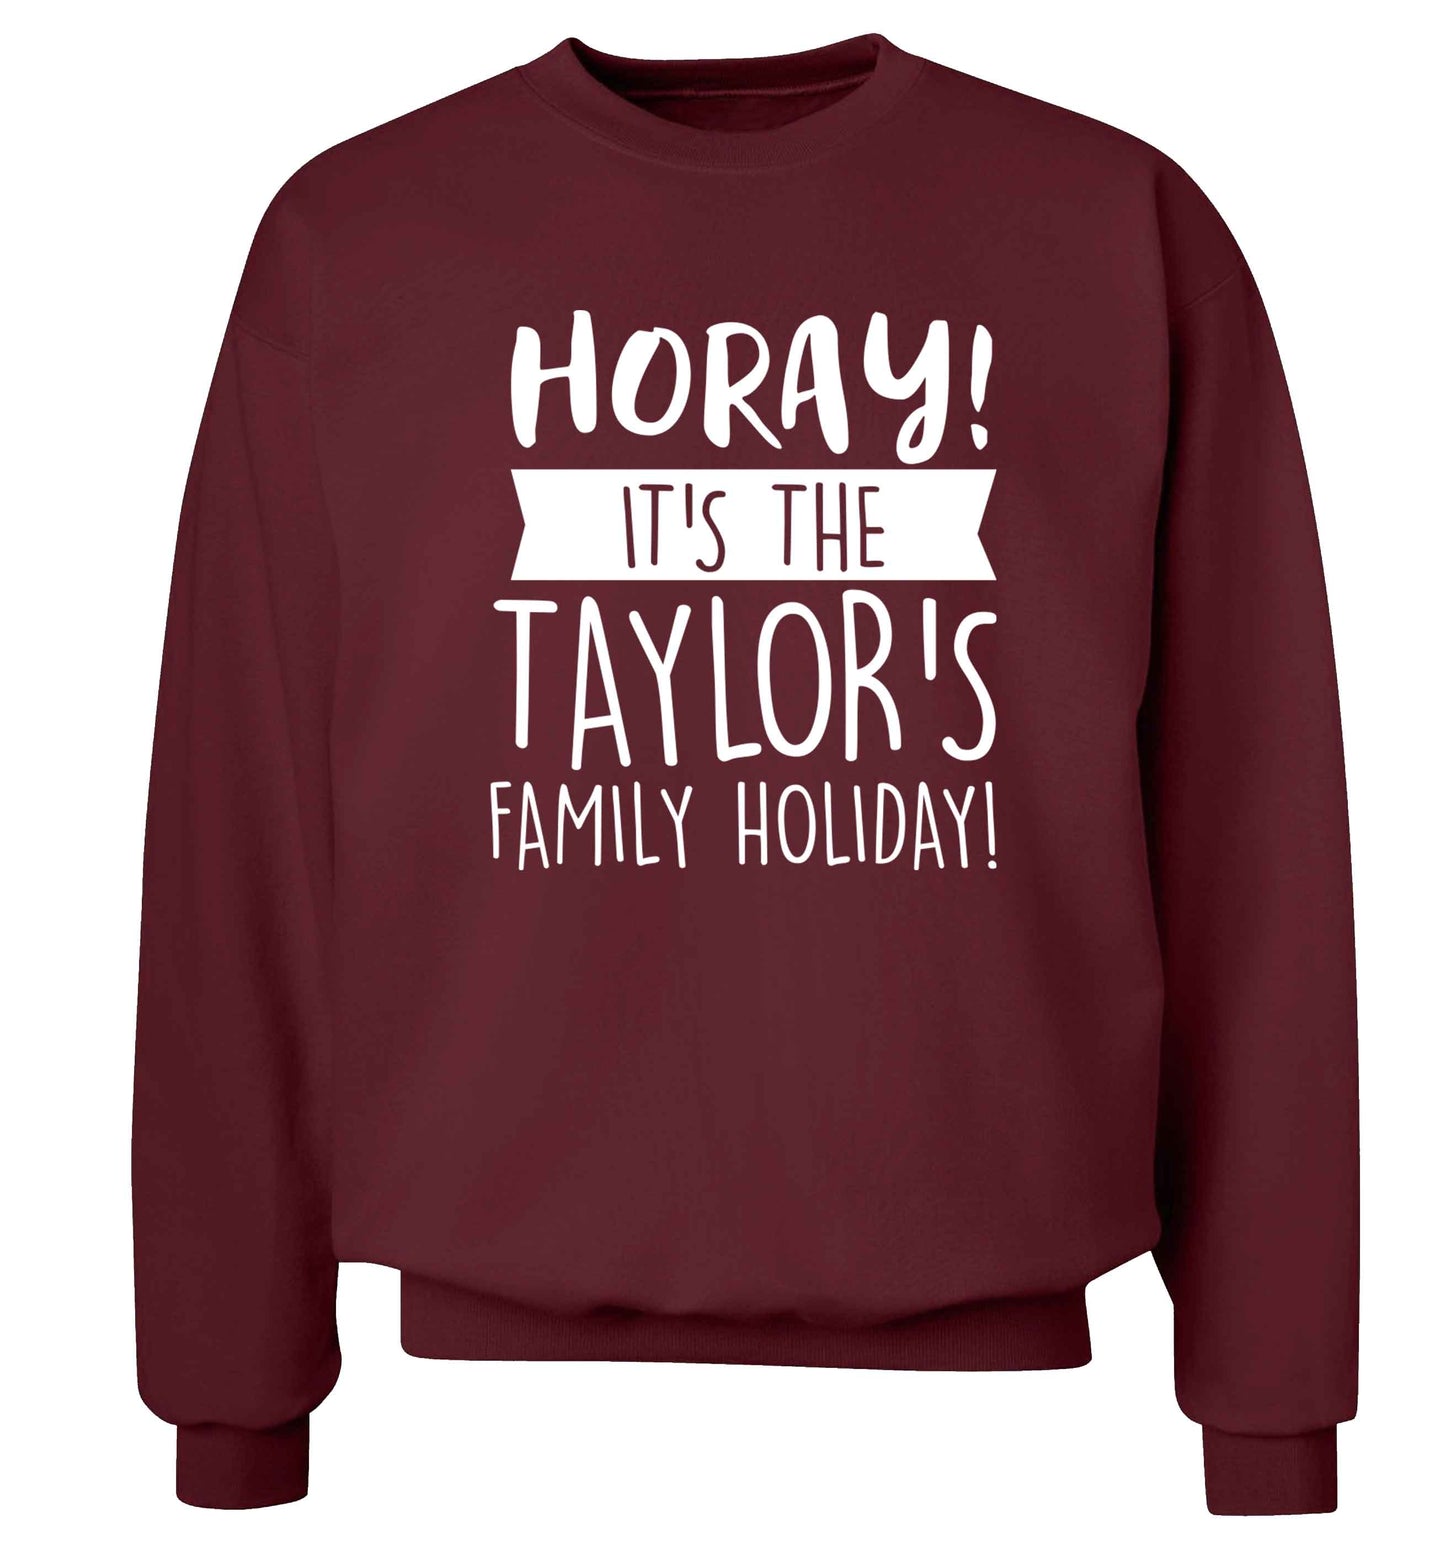 Horay it's the Taylor's family holiday! personalised item Adult's unisex maroon Sweater 2XL